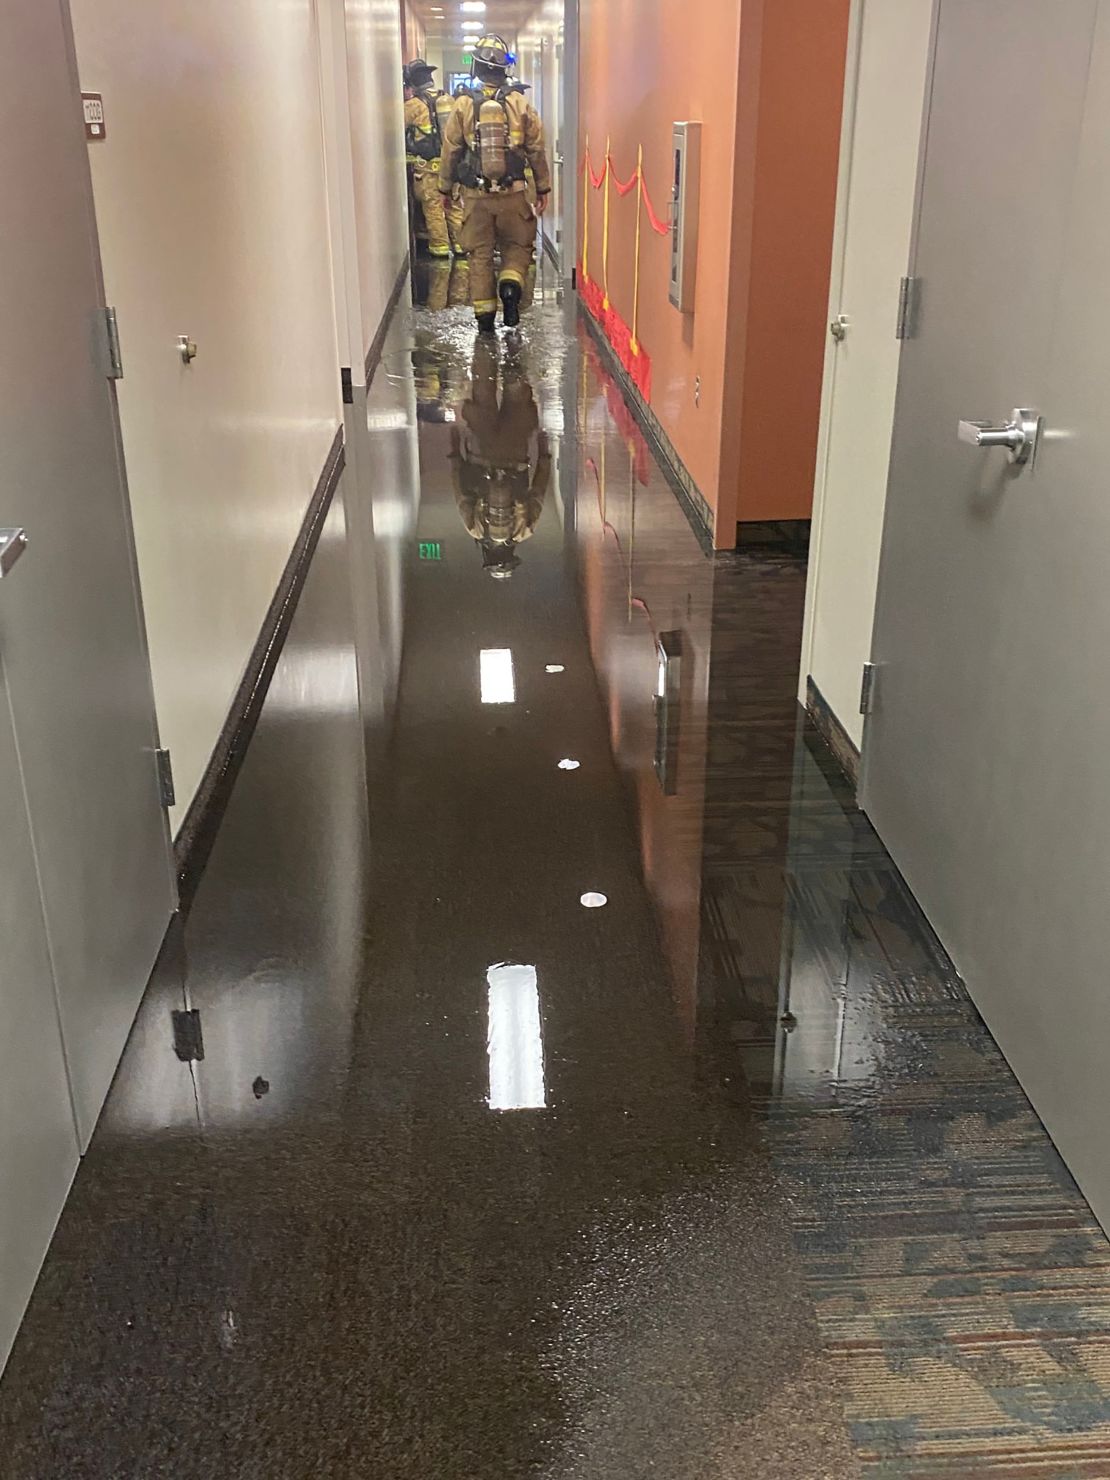 Water from the sprinklers flooded other units.